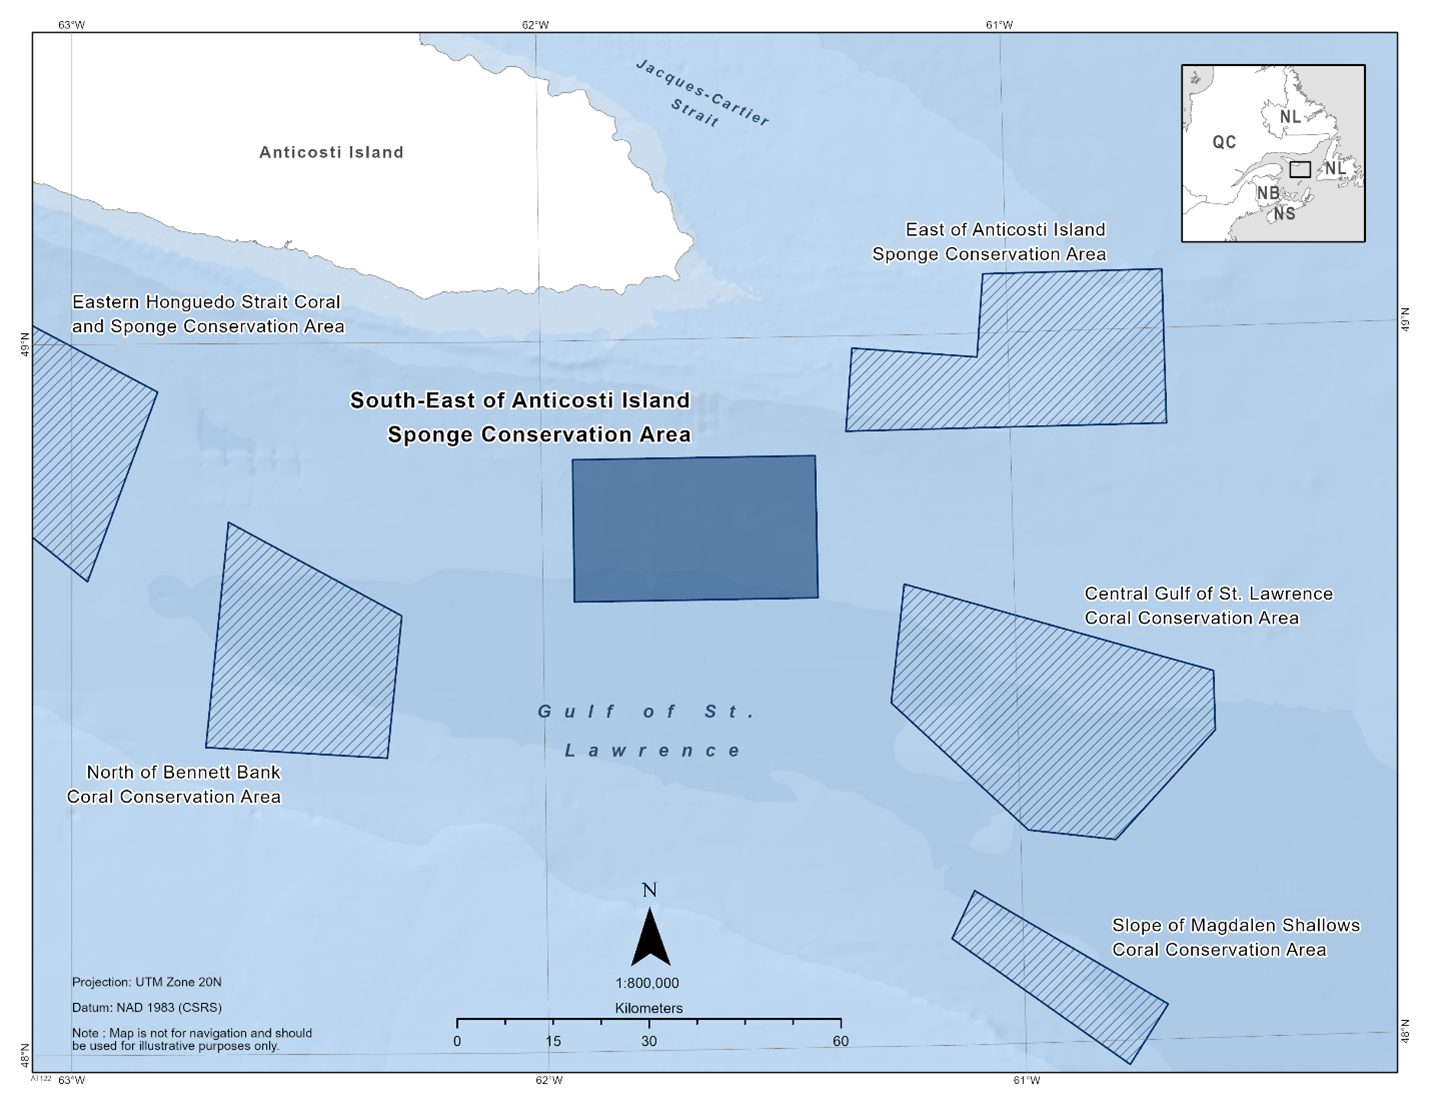 Map of the South-East of Anticosti Island Sponge Conservation Area in dark blue. The map also features other marine refuges nearby with dark blue diagonal lines (Eastern Honguedo Strait Coral and Sponge Conservation Area, East of Anticosti Island Sponge Conservation Area, North of Bennett Bank Coral Conservation Area, Central Gulf of St. Lawrence Coral Conservation Area, Slope of Magdalen Shallows Coral Conservation Area).